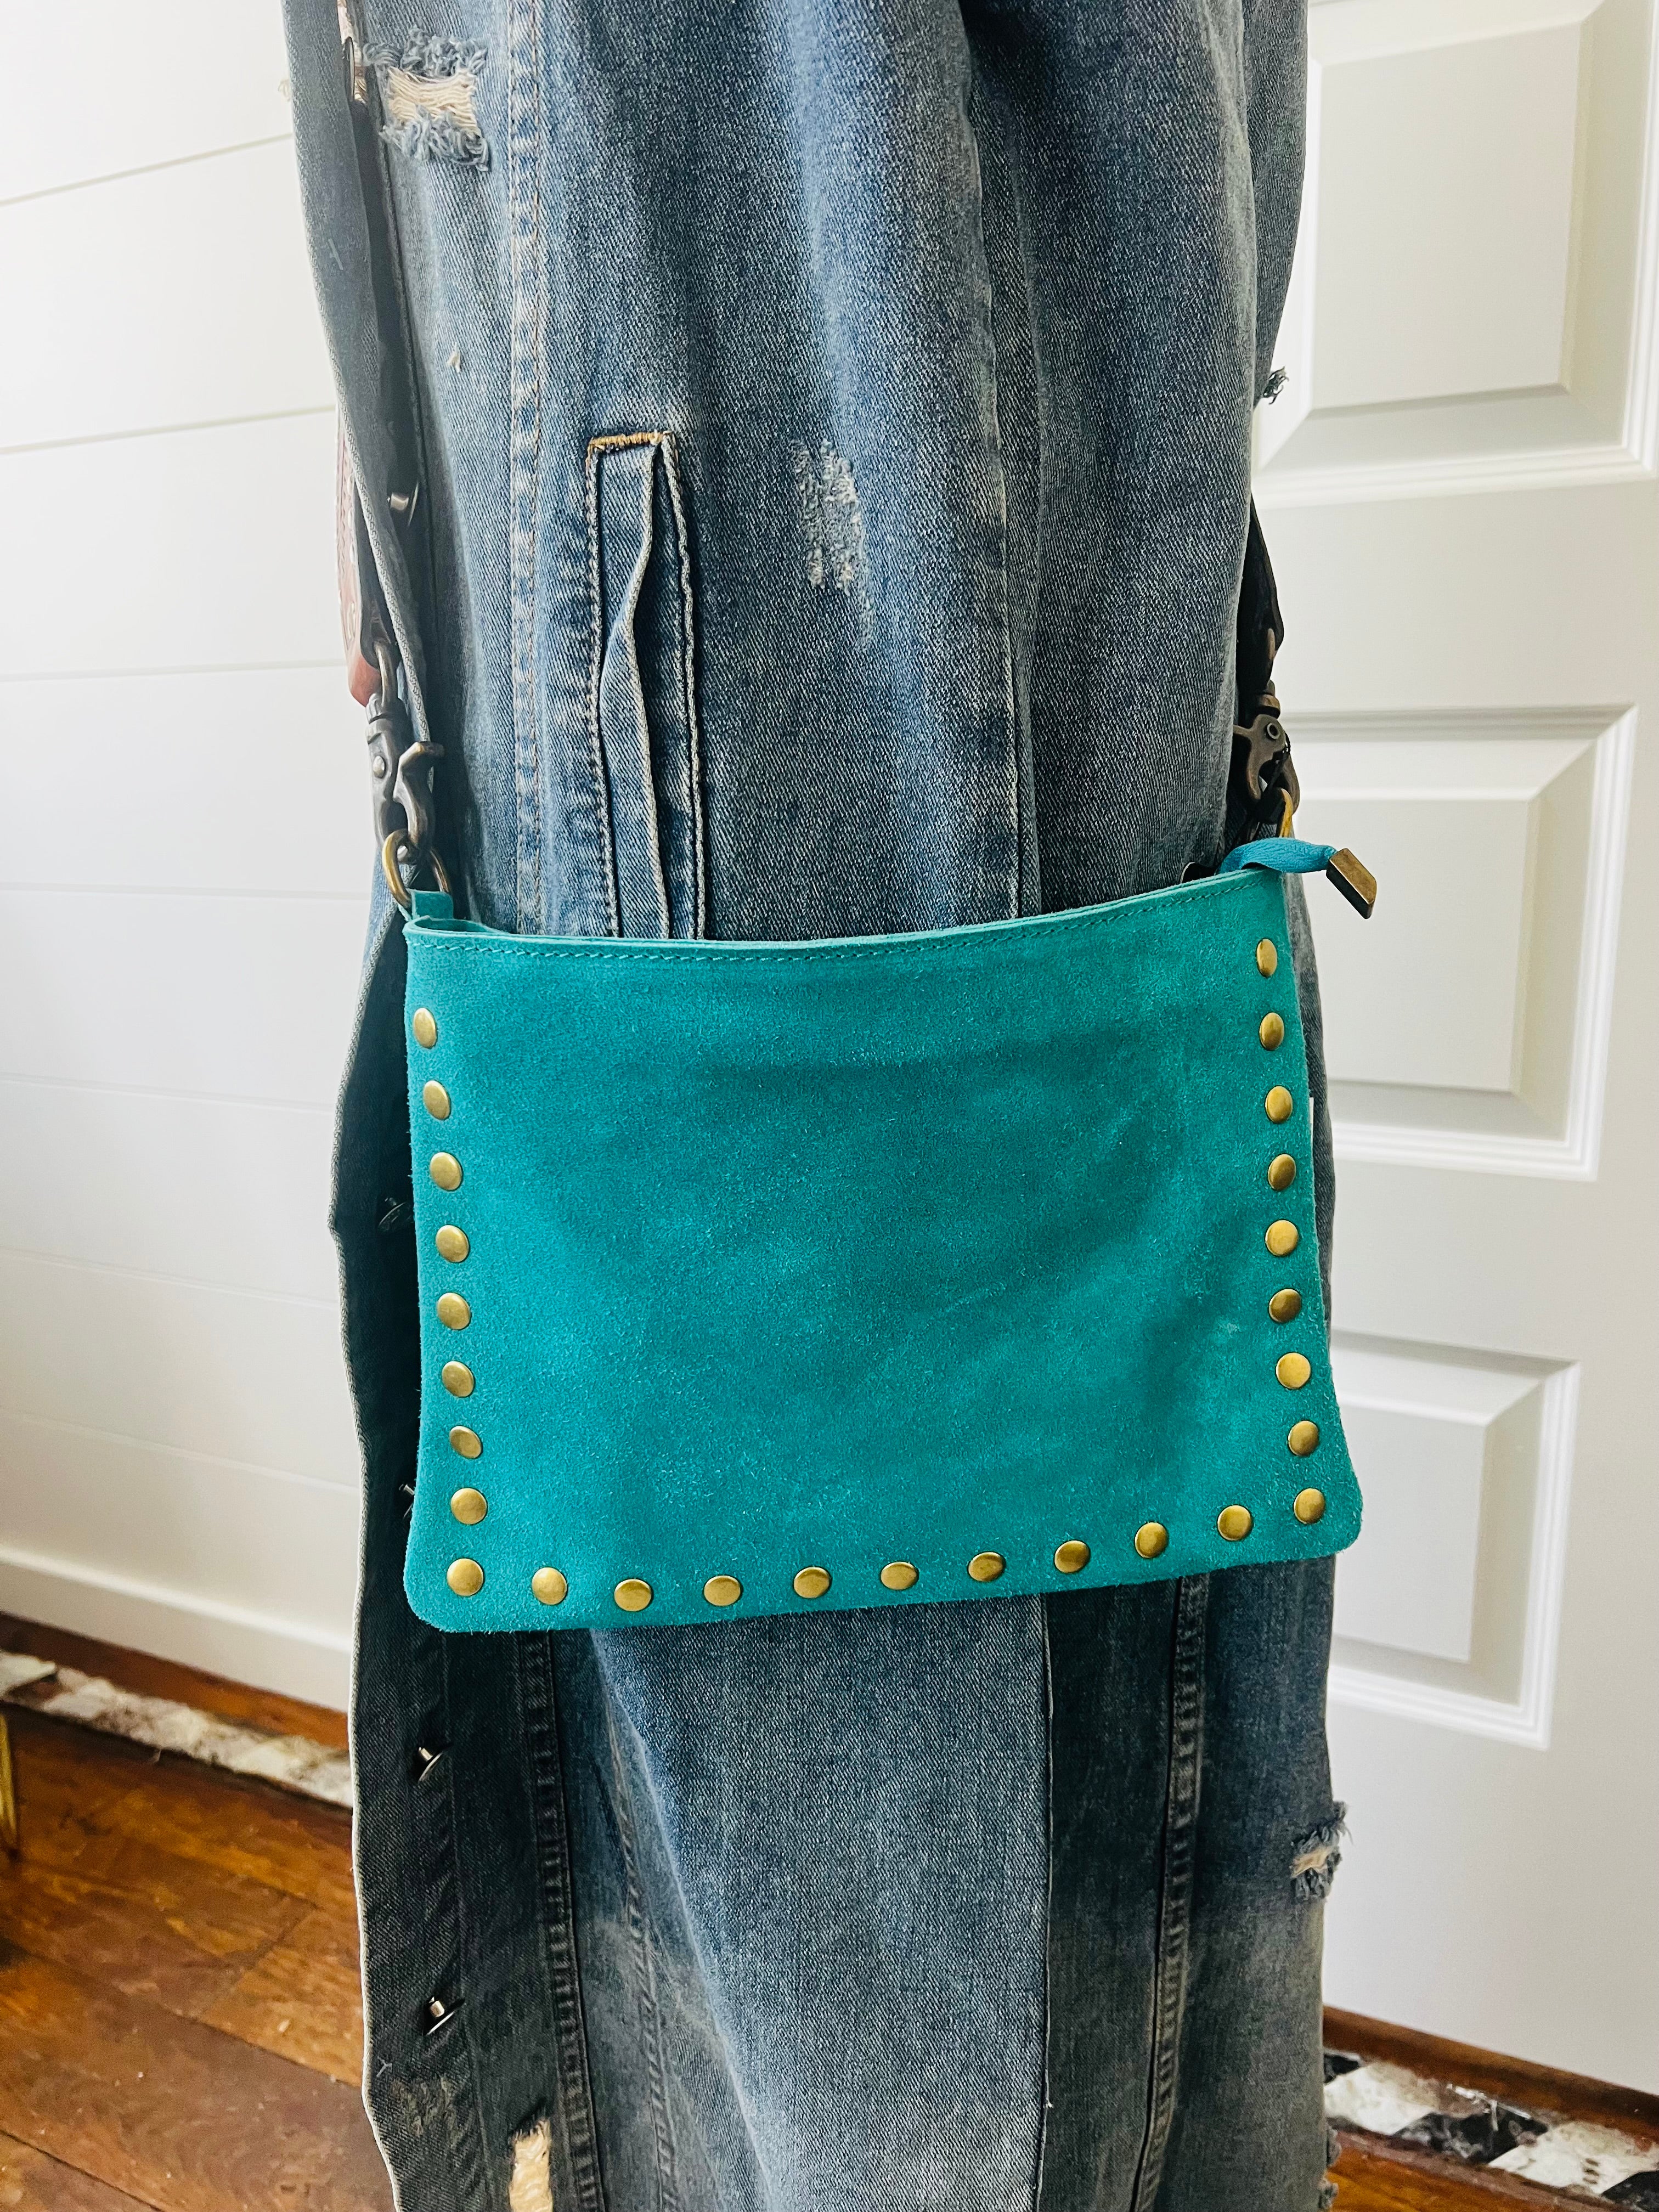 Turquoise Suede Leather Handbag w/ tooled purse strap